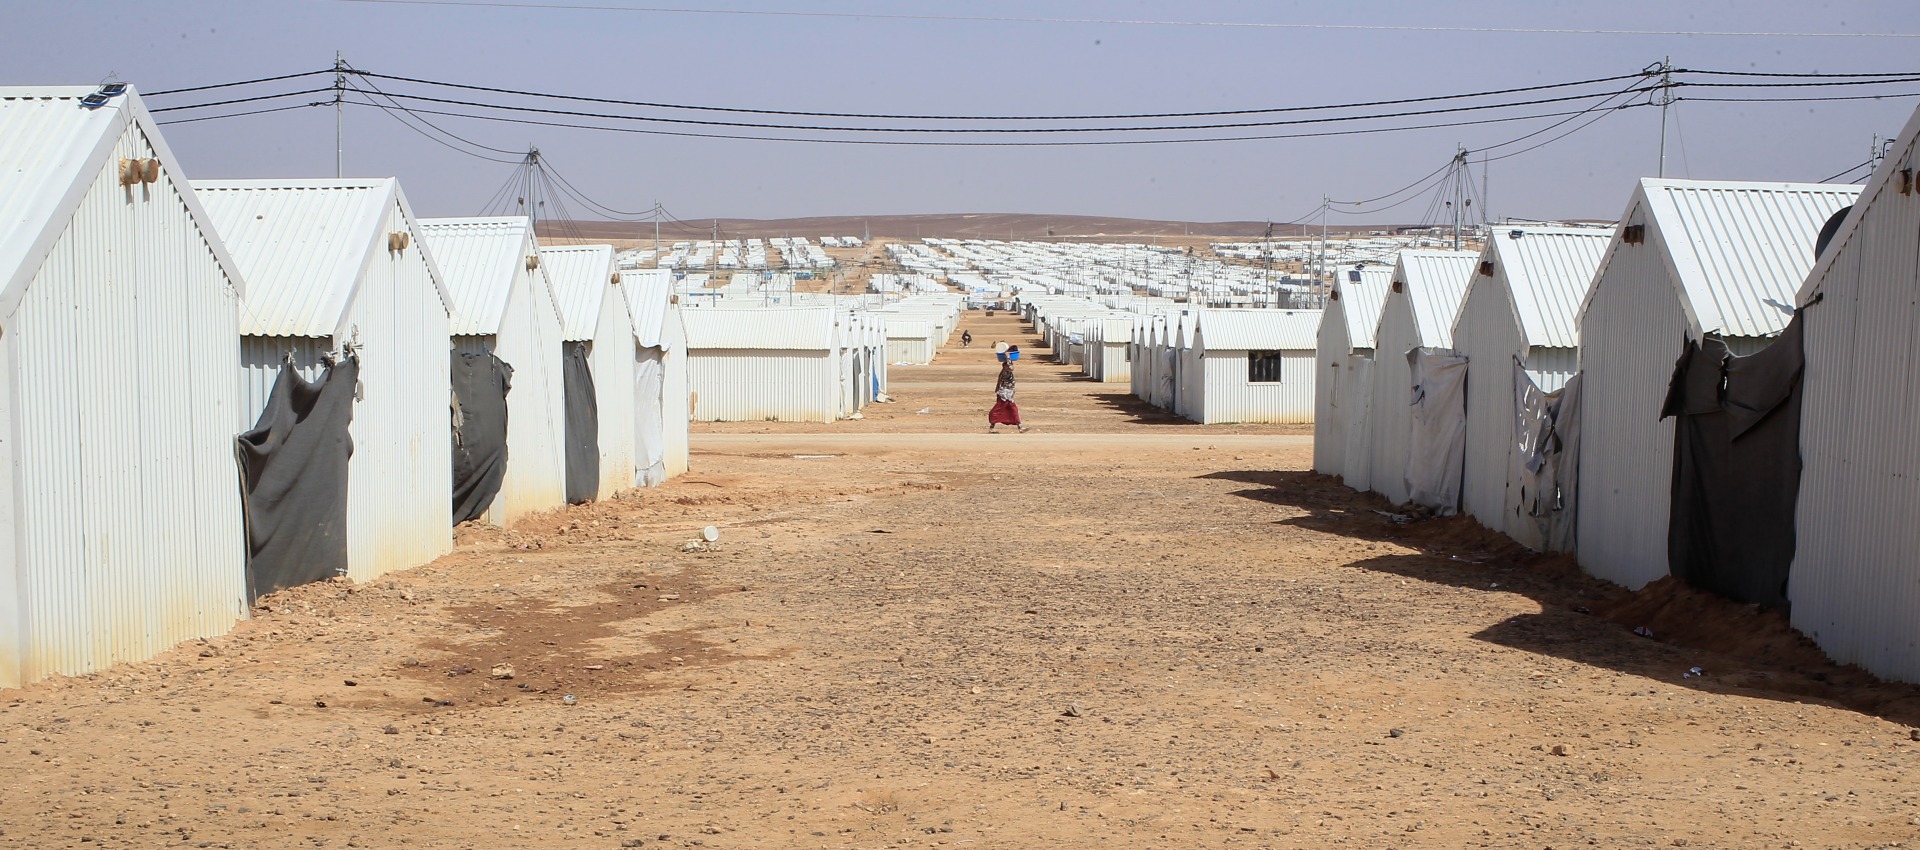 A refugee camp in Jordan, home to thousands of Syrian refugees.